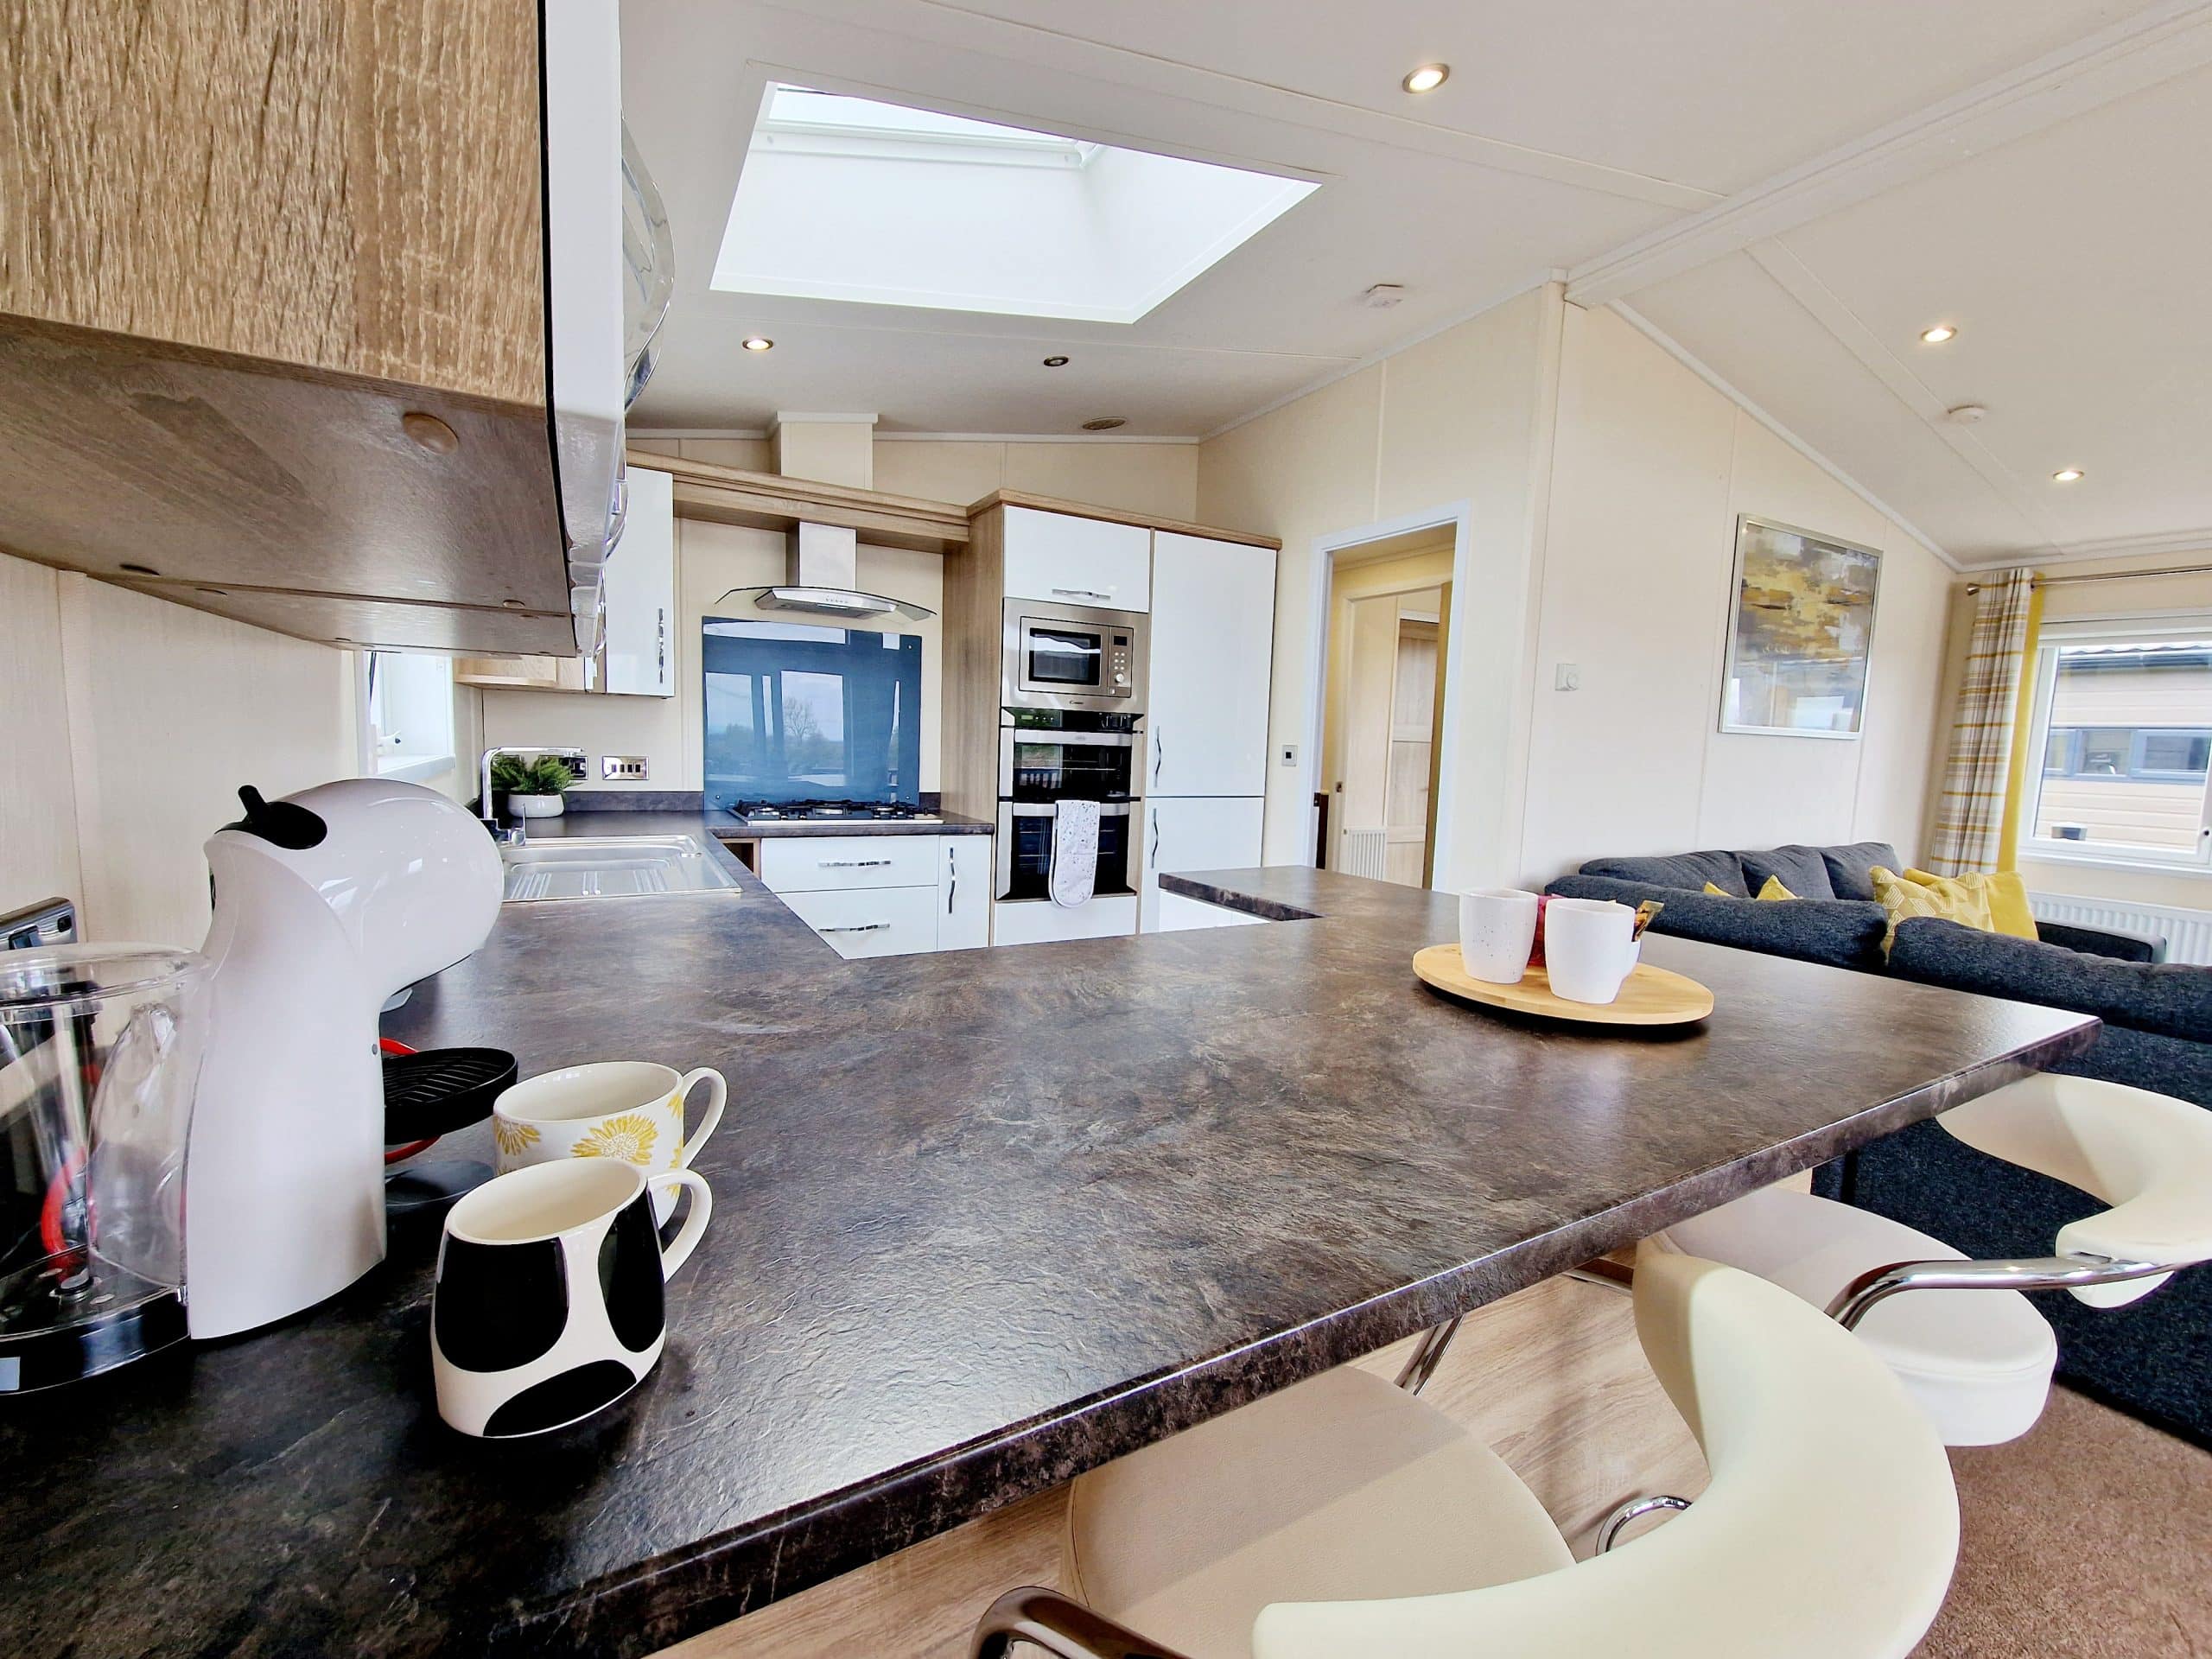 Image 2 of stunning-brand-new-carnaby-silverdale-39x12-2-bedroom-2022